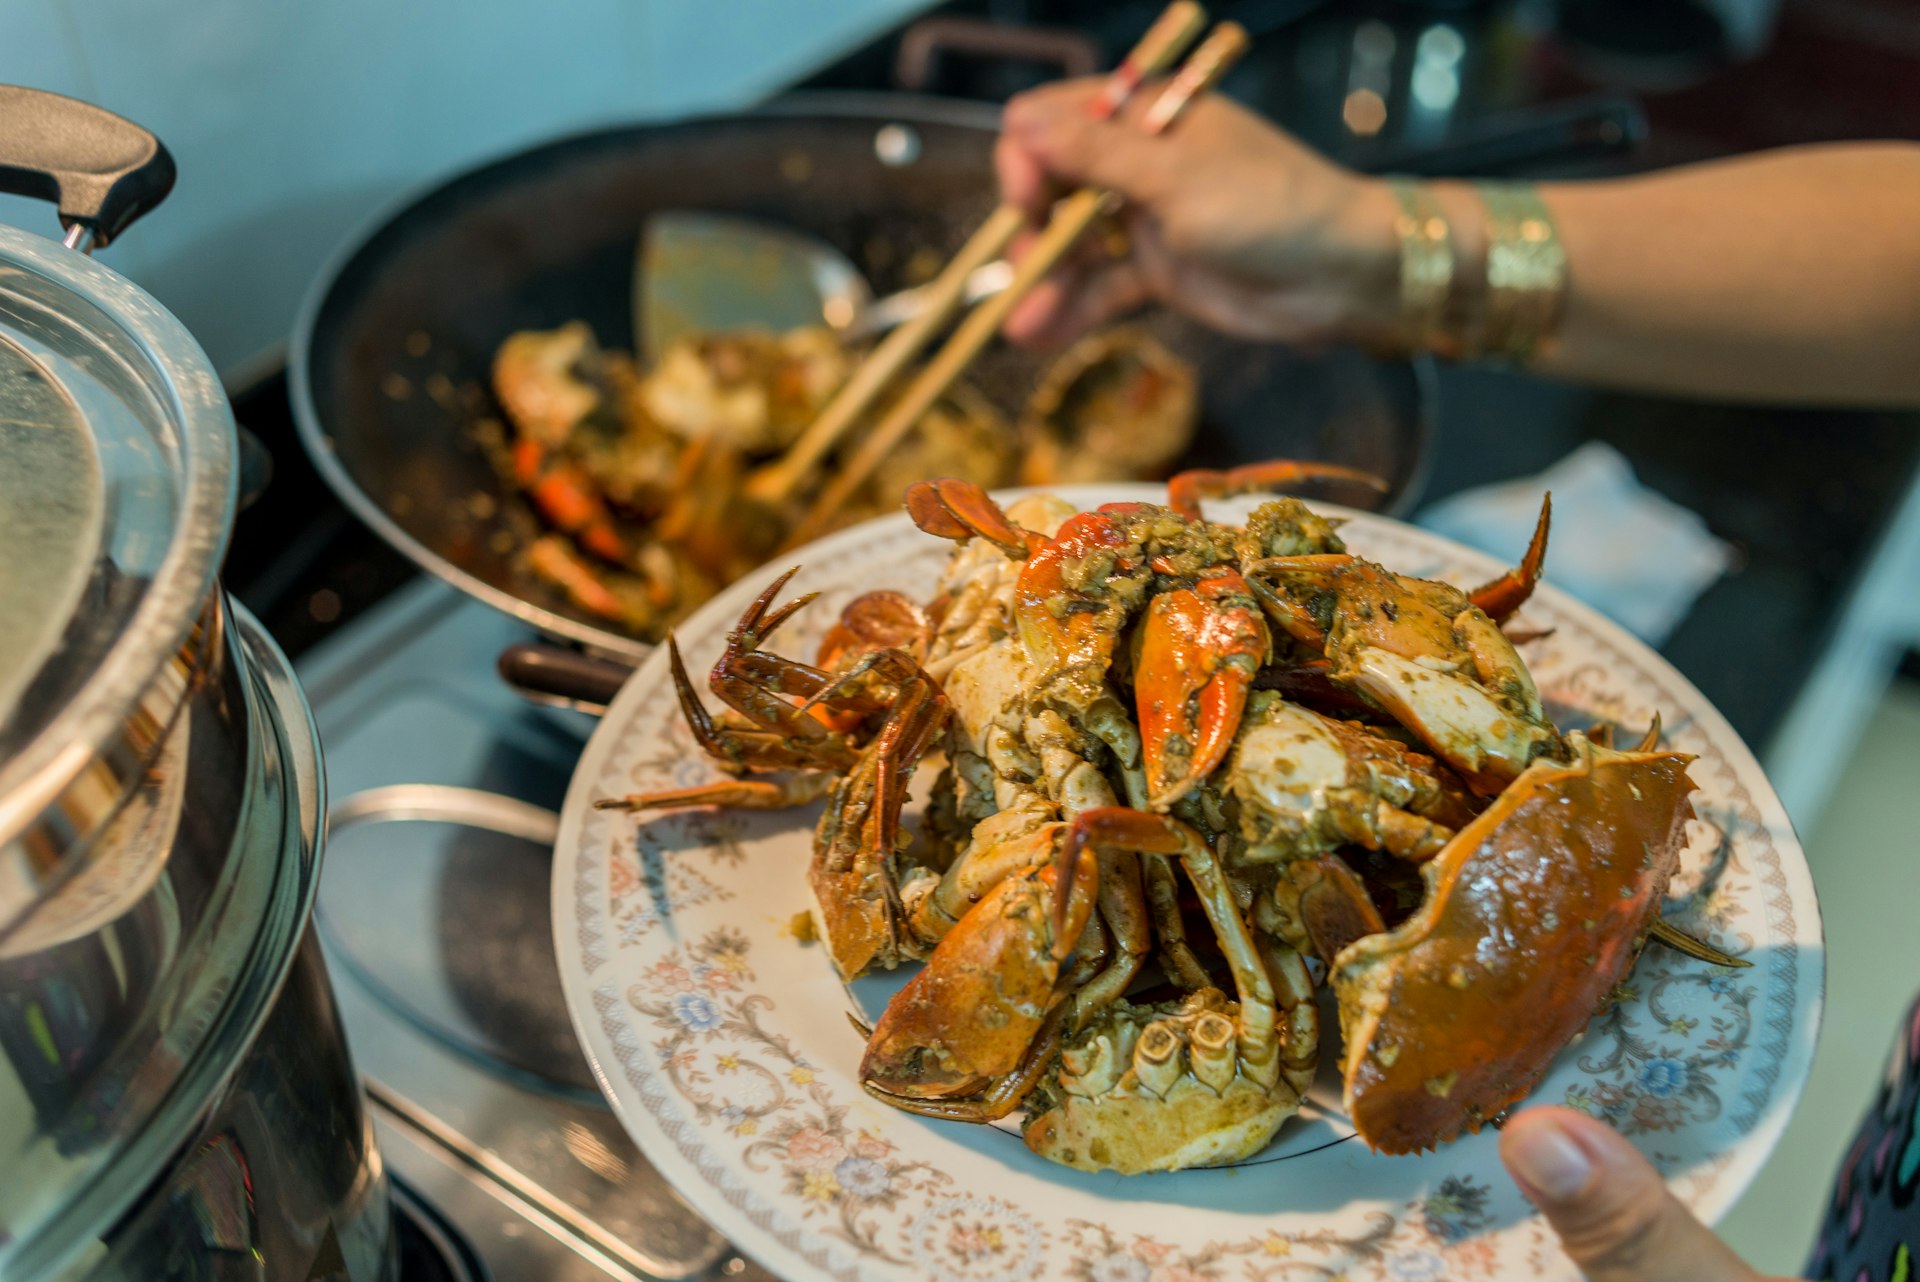 A lady prepares home-cooked chili crab for a family dinner.